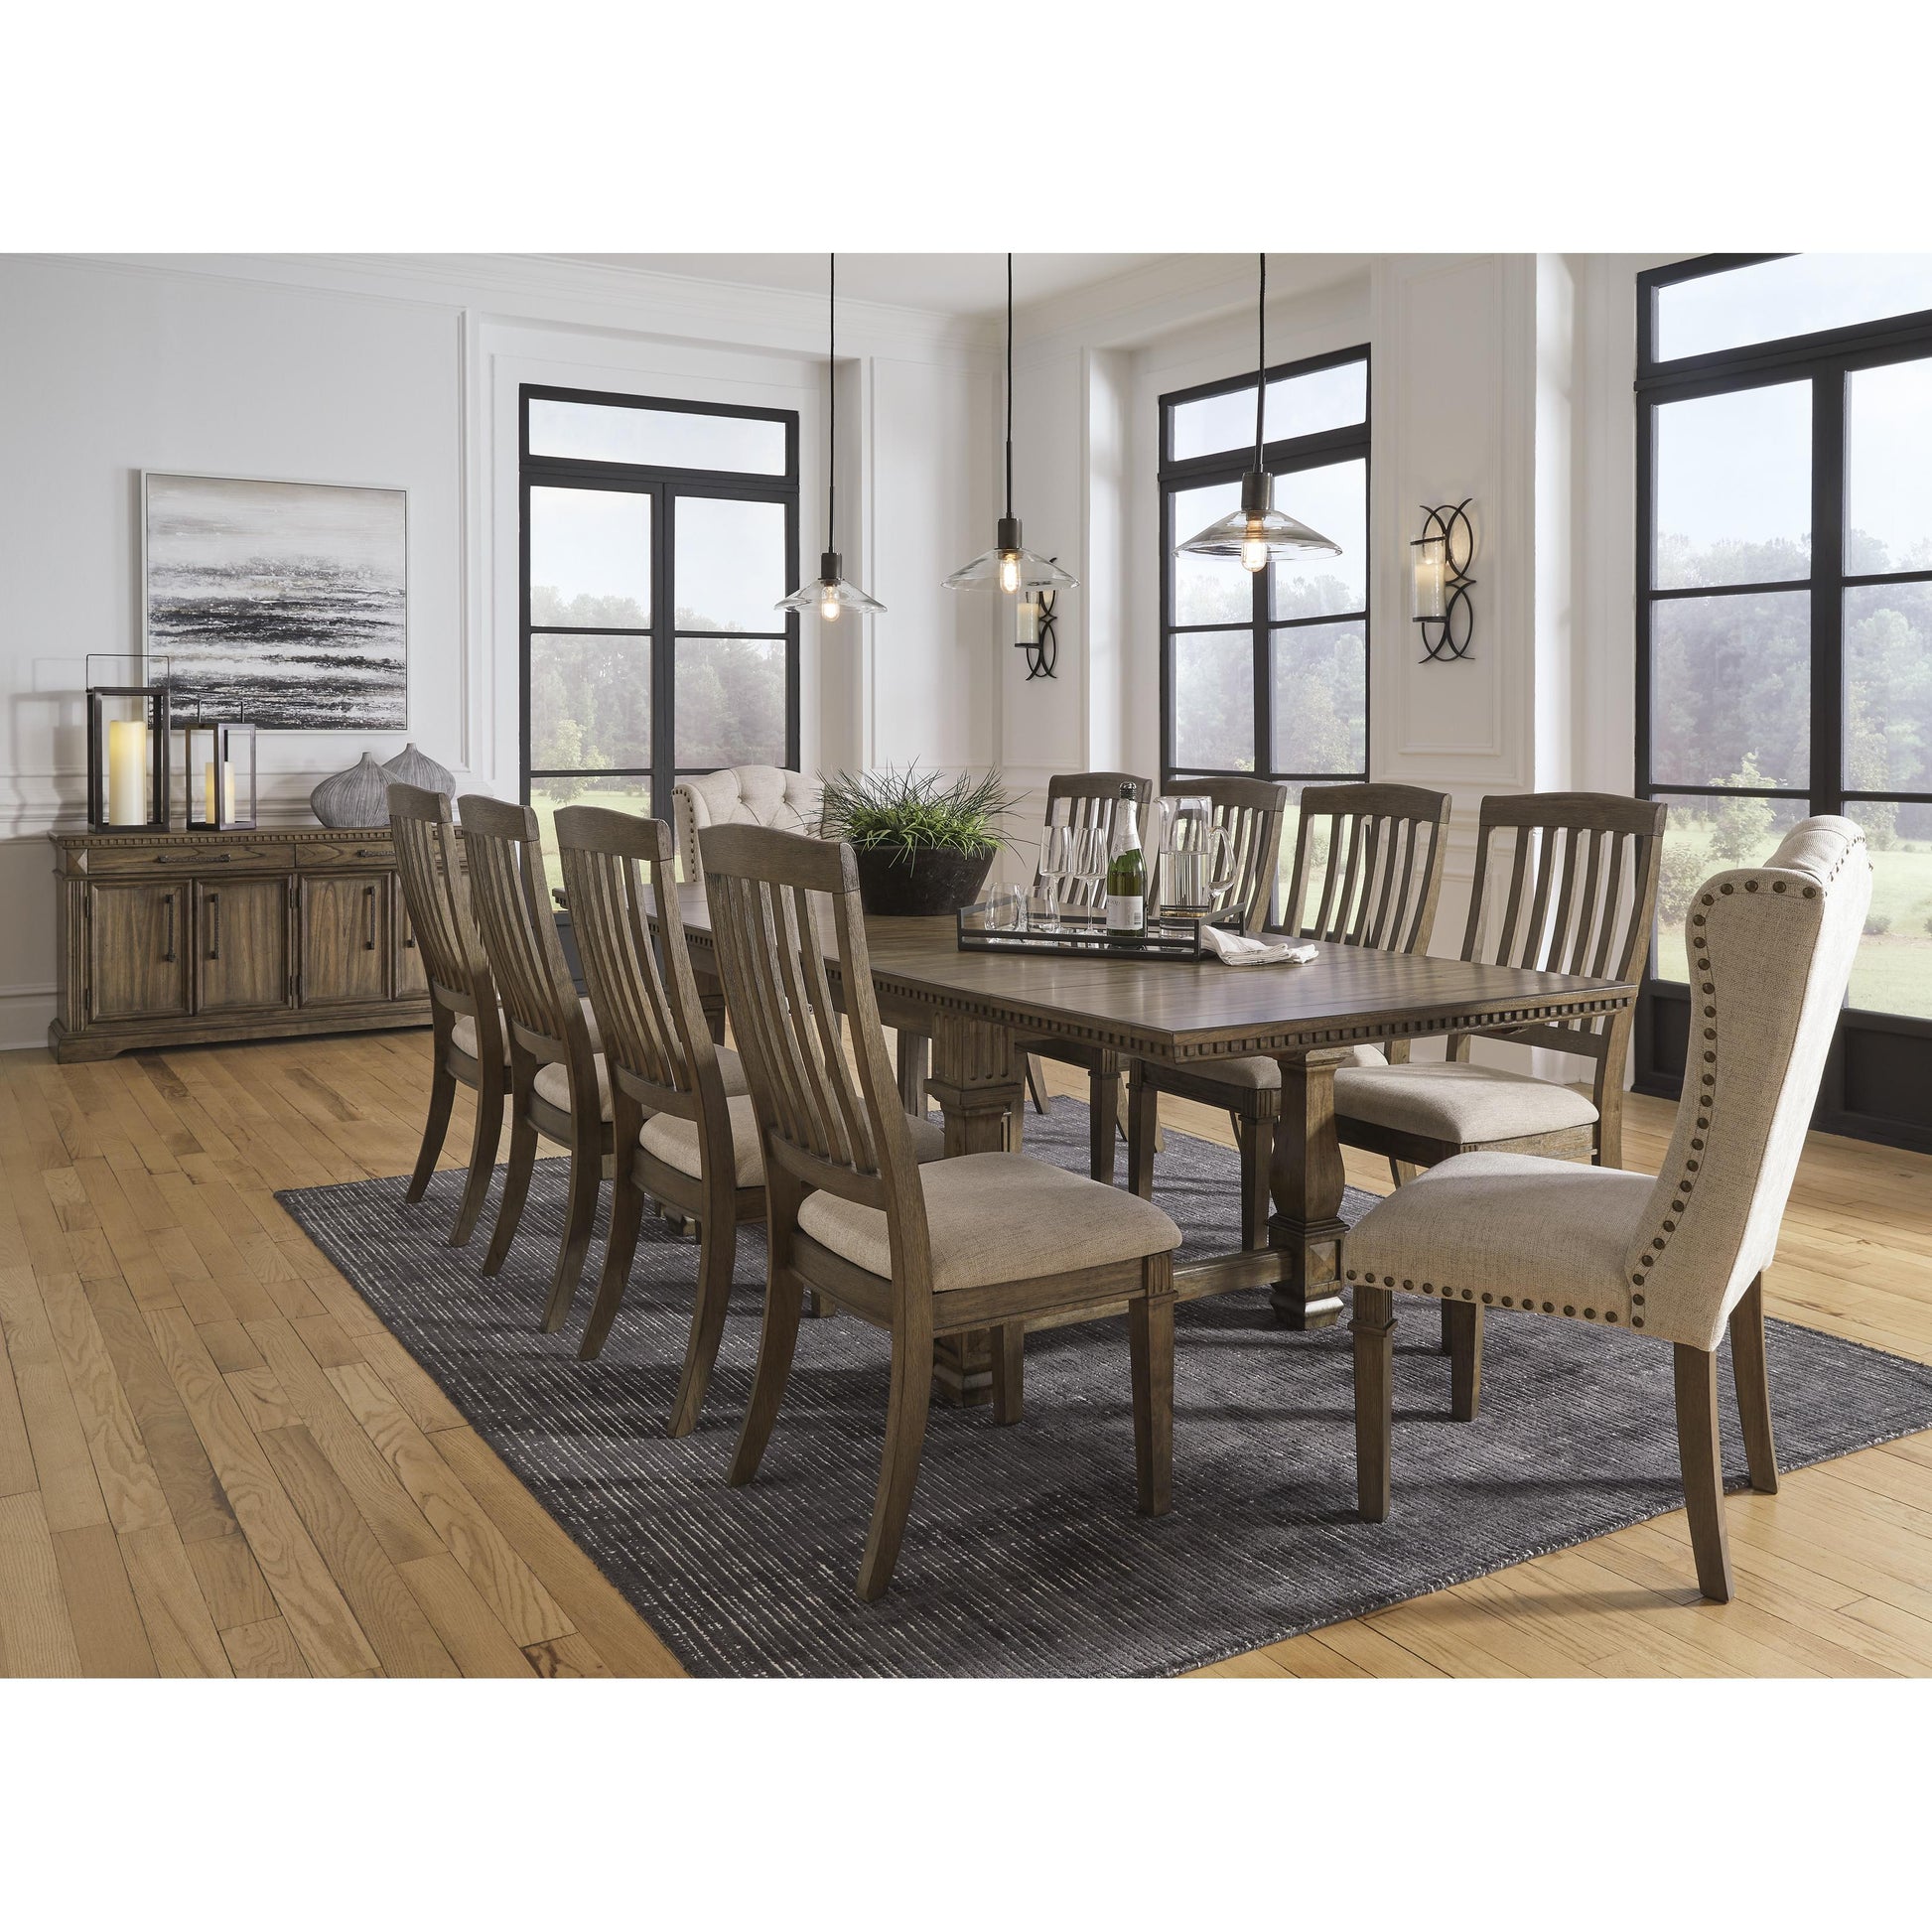 Signature Design by Ashley Markenburg Dining Chair D770-01 IMAGE 9